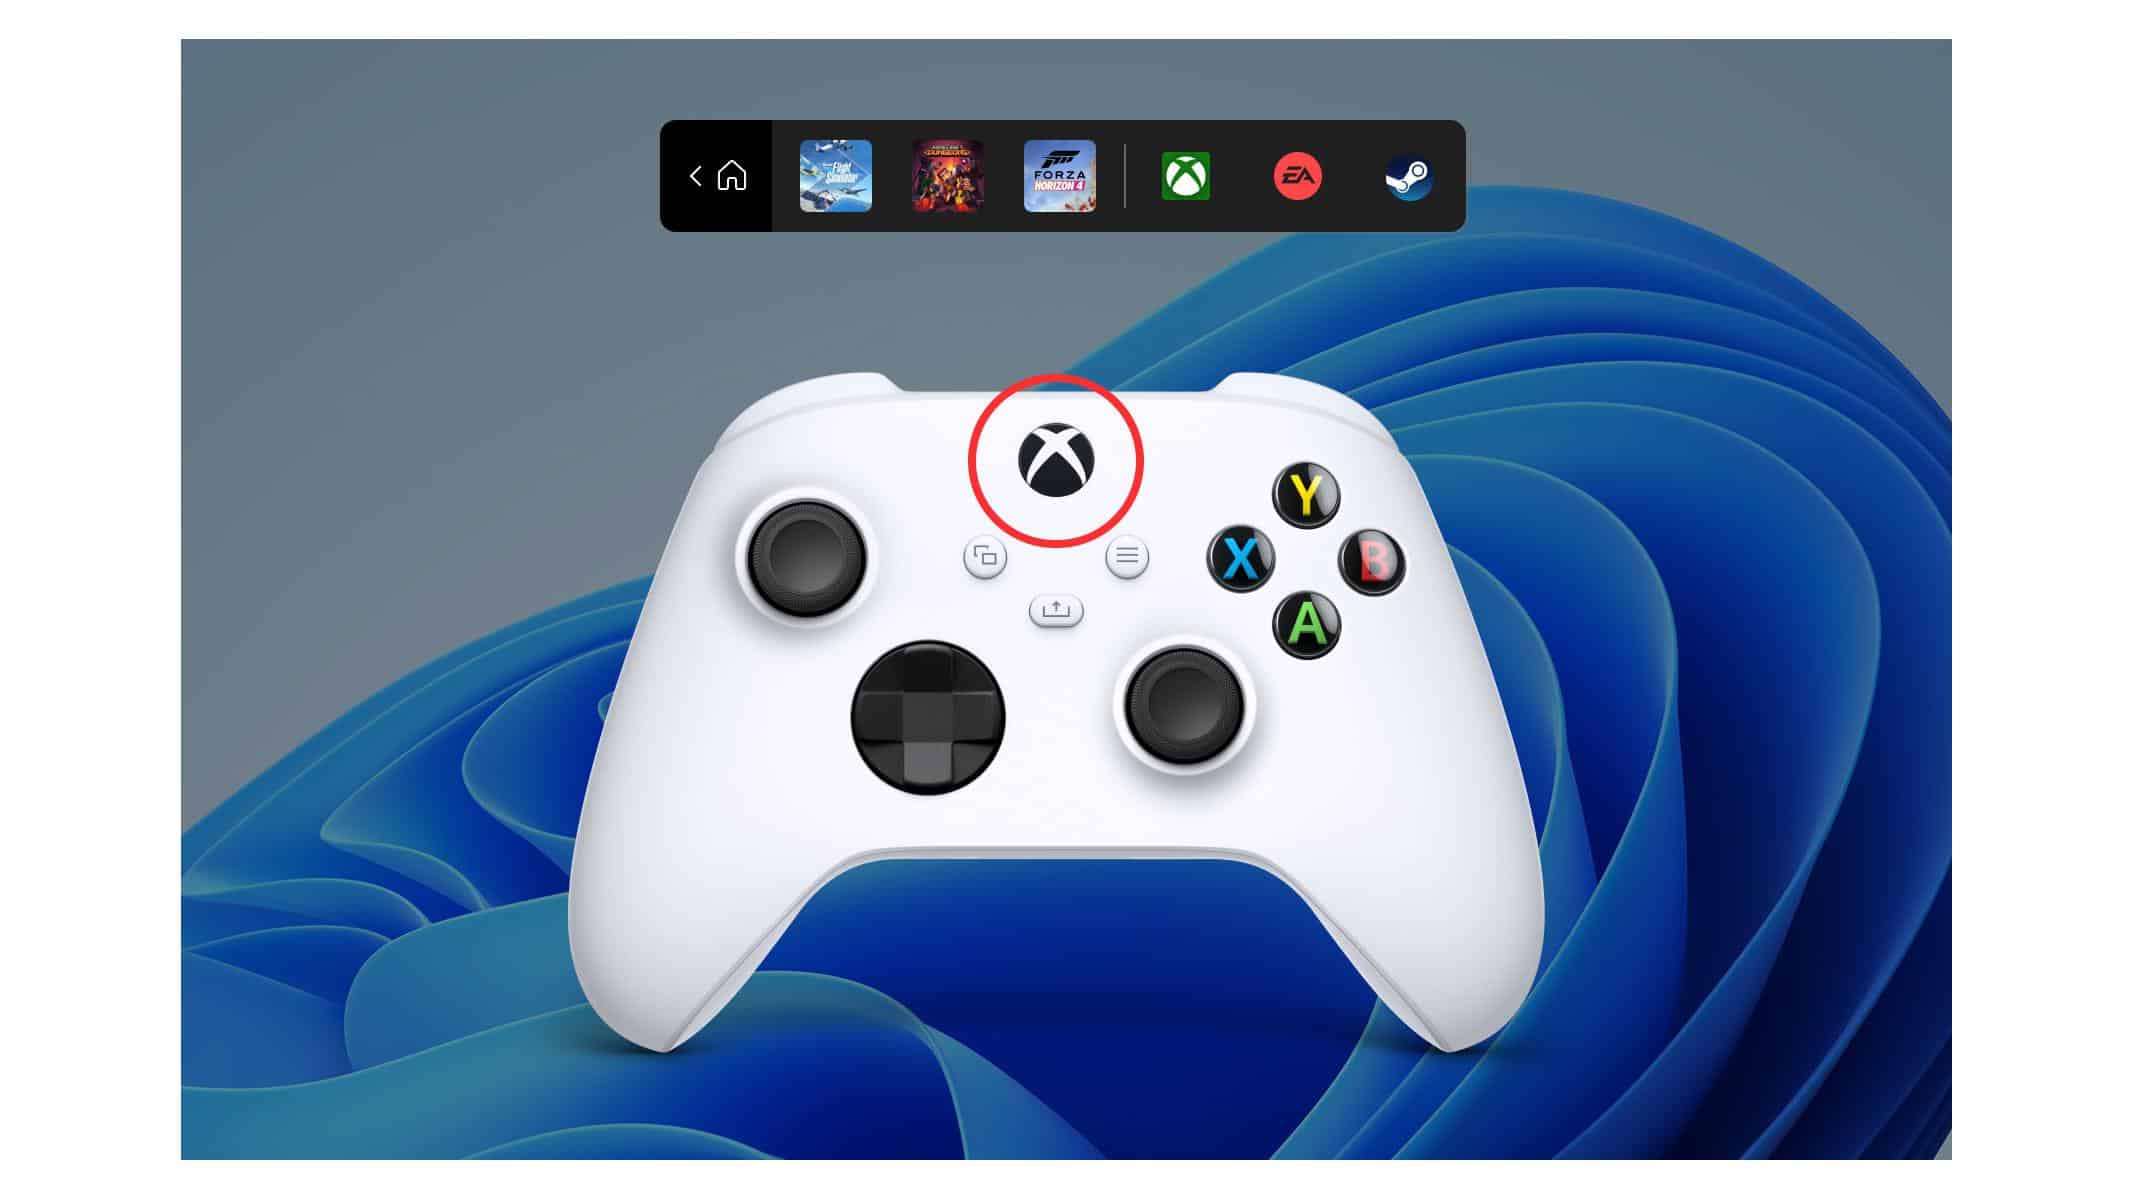 New Windows Insiders update allows launching of cloud streaming games from Controller Bar